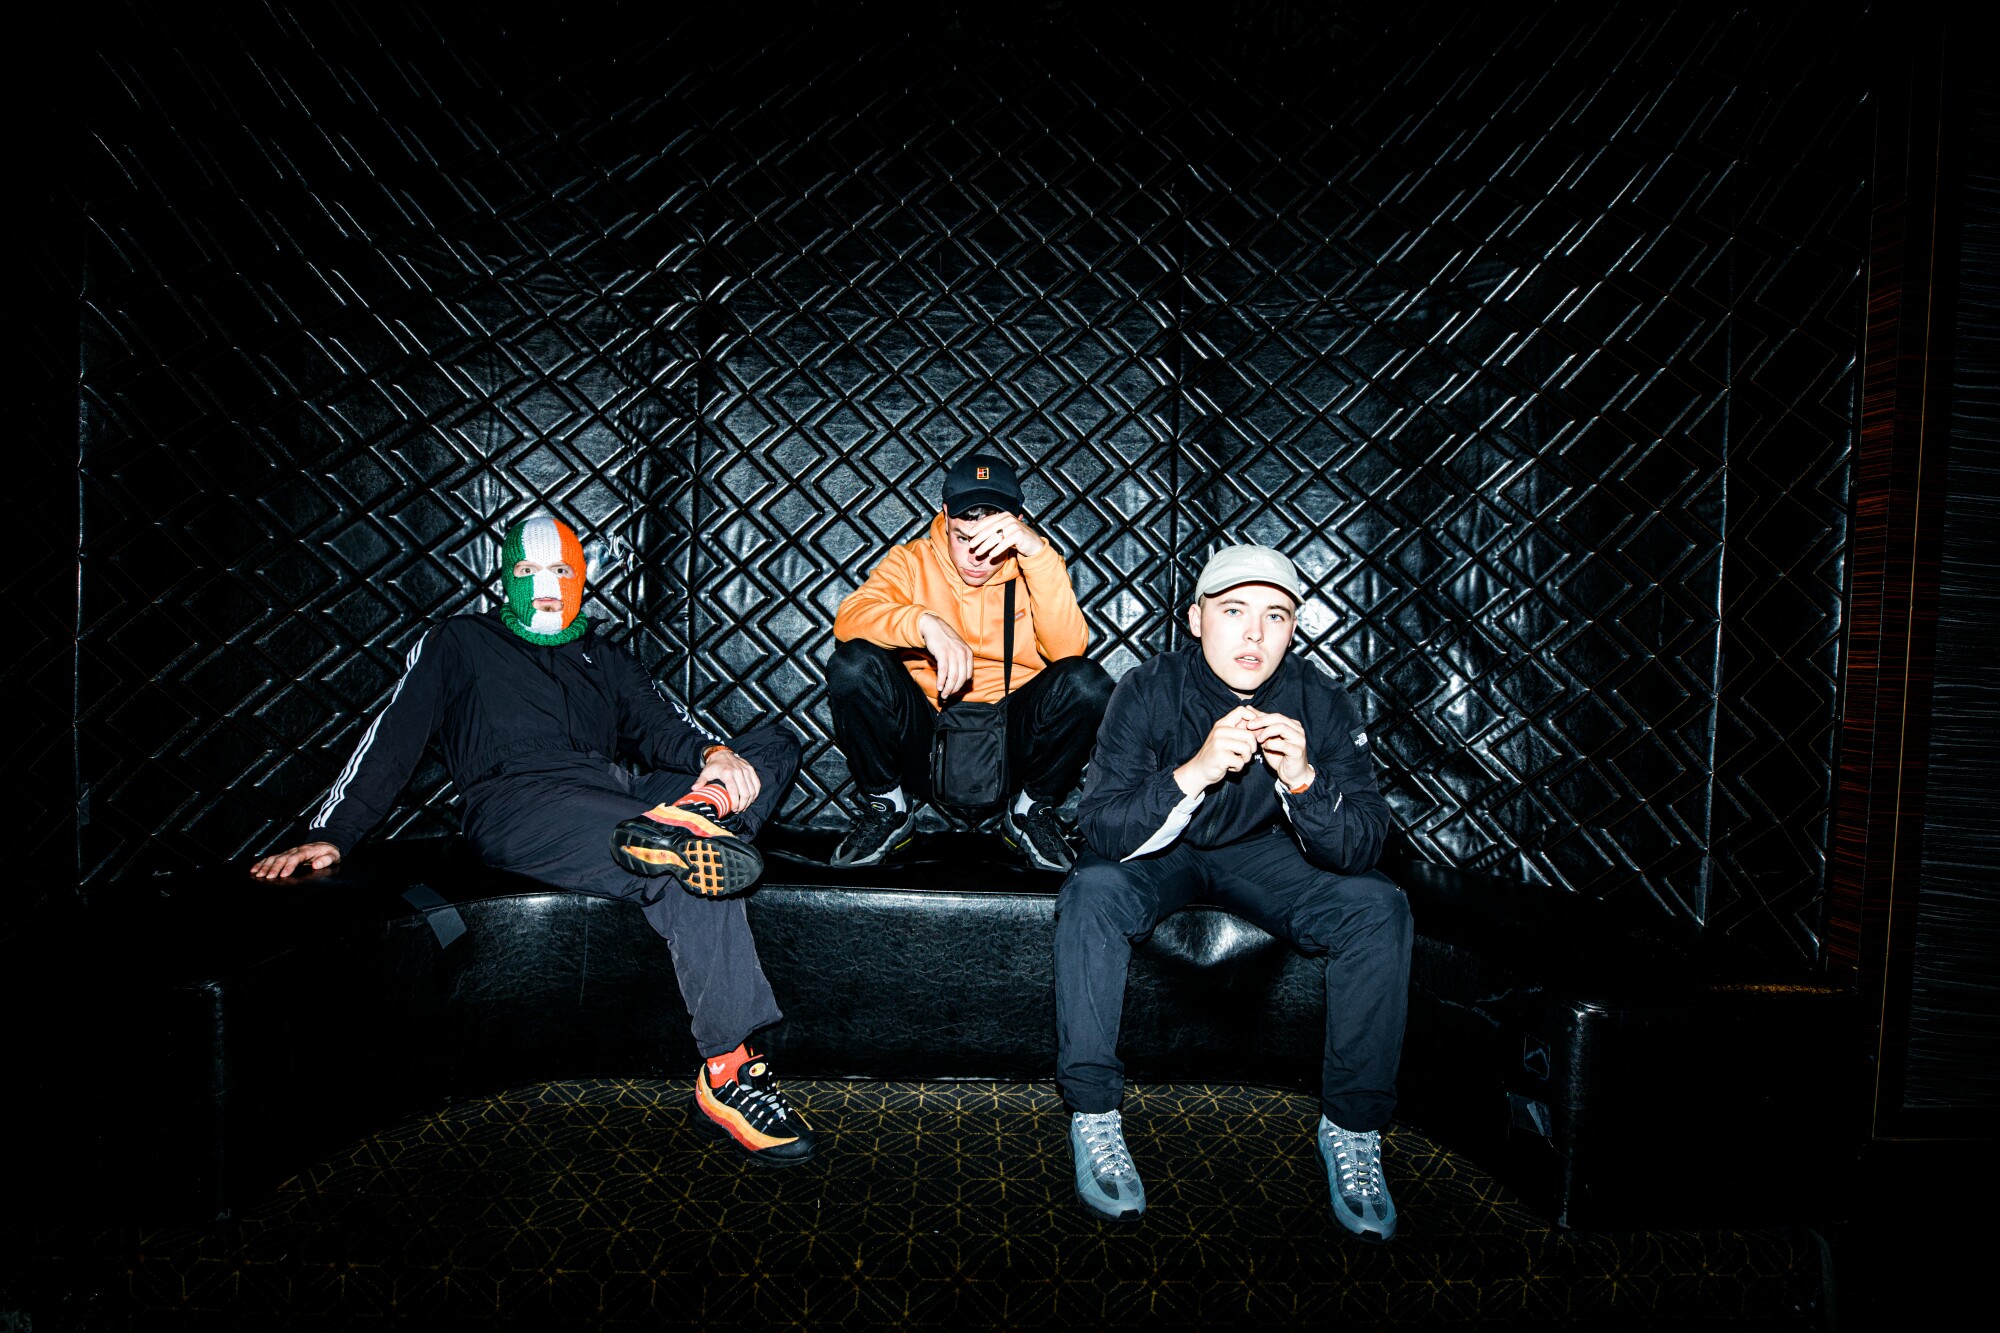 Three men are sitting in front of a black wall with a diamond pattern.